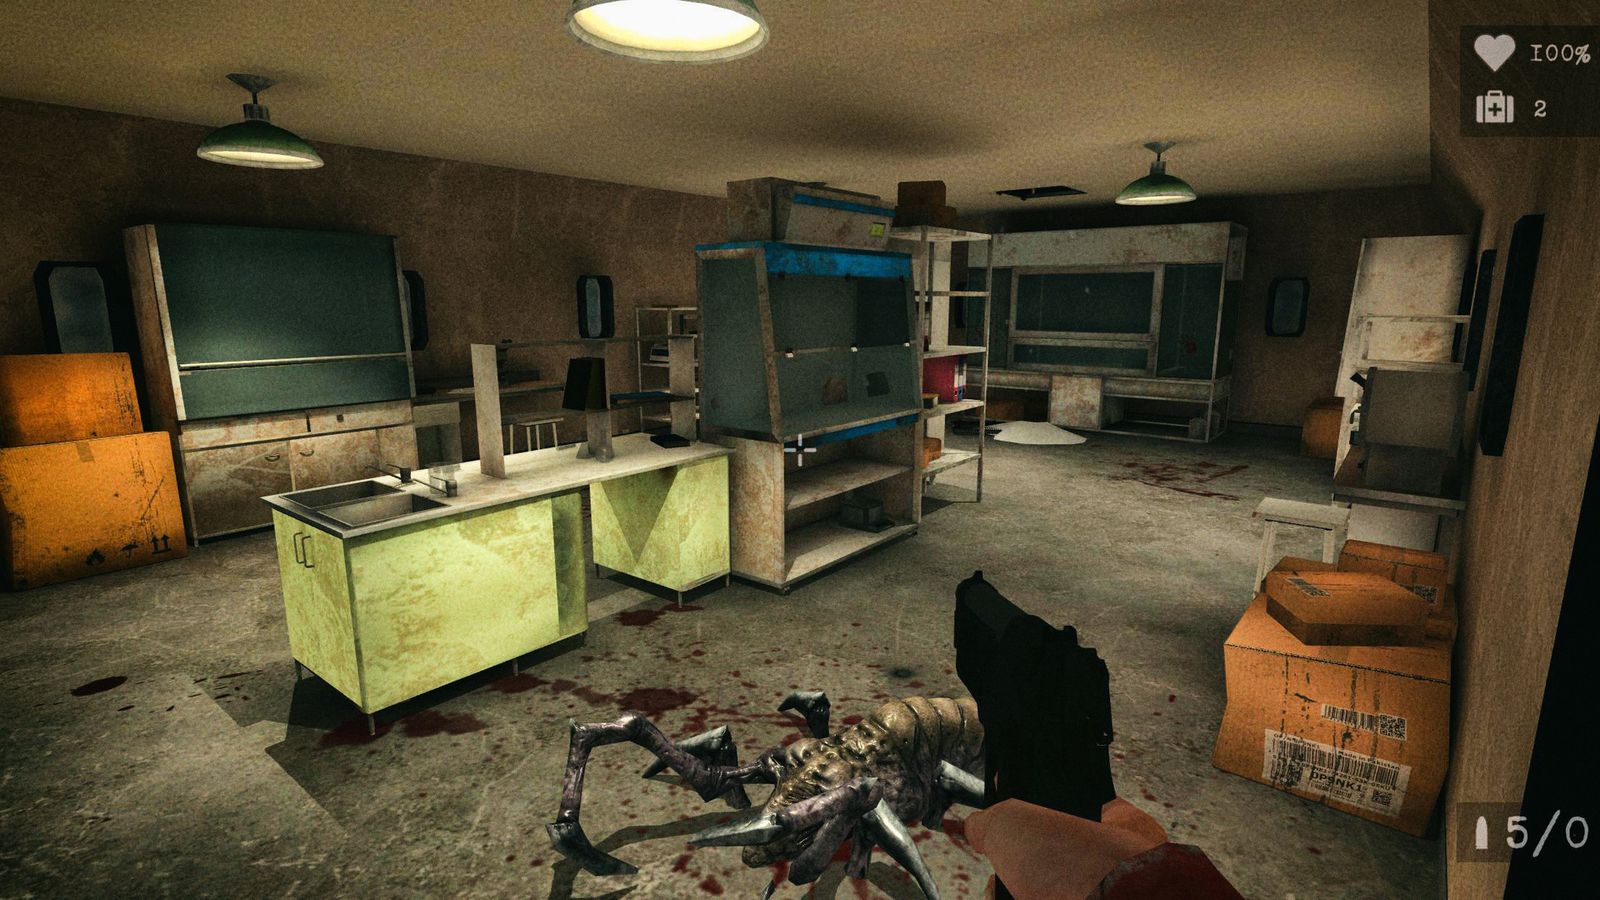 Screenshot from Antarctica, showing the first-person protagonist killing a spider-type creature in a bunker